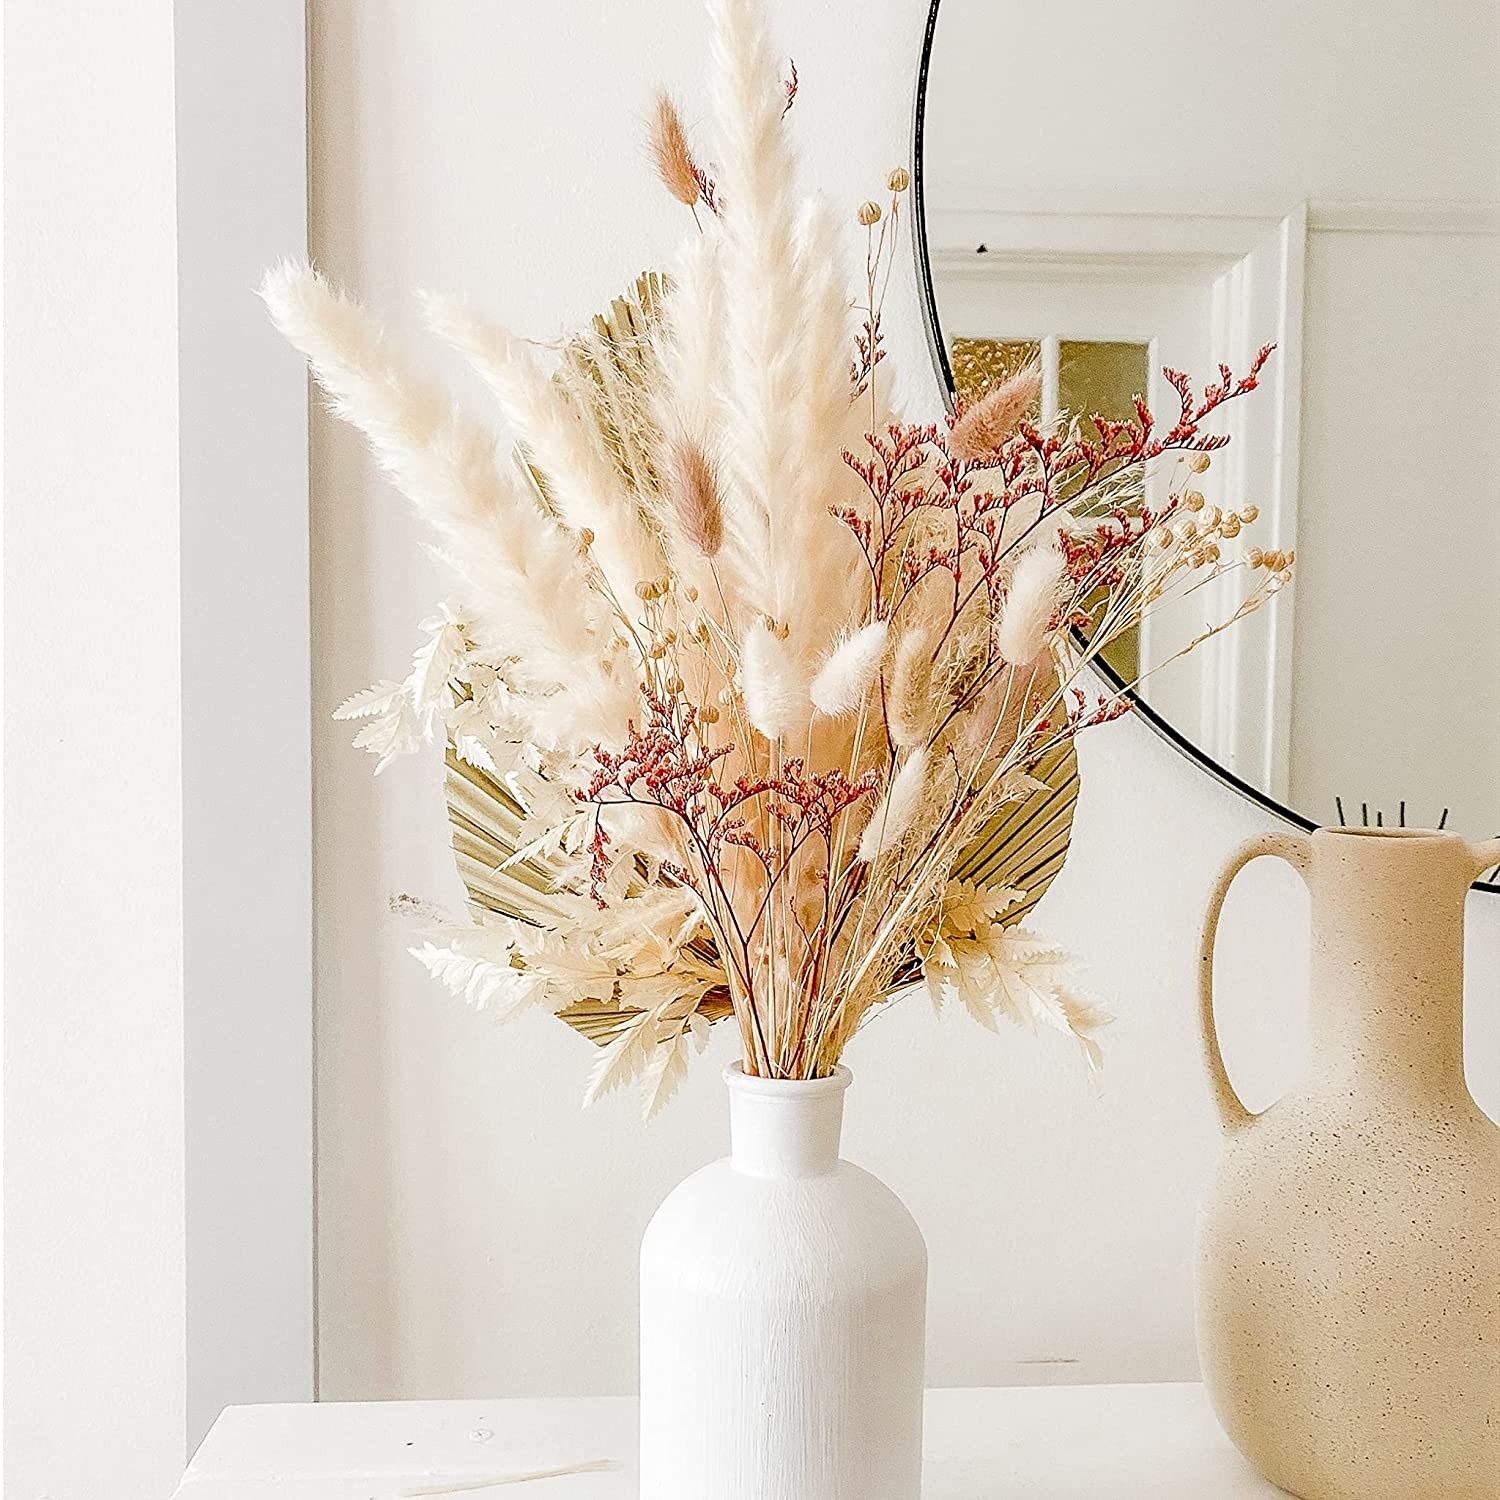 Dried bouquet displayed in a white vase